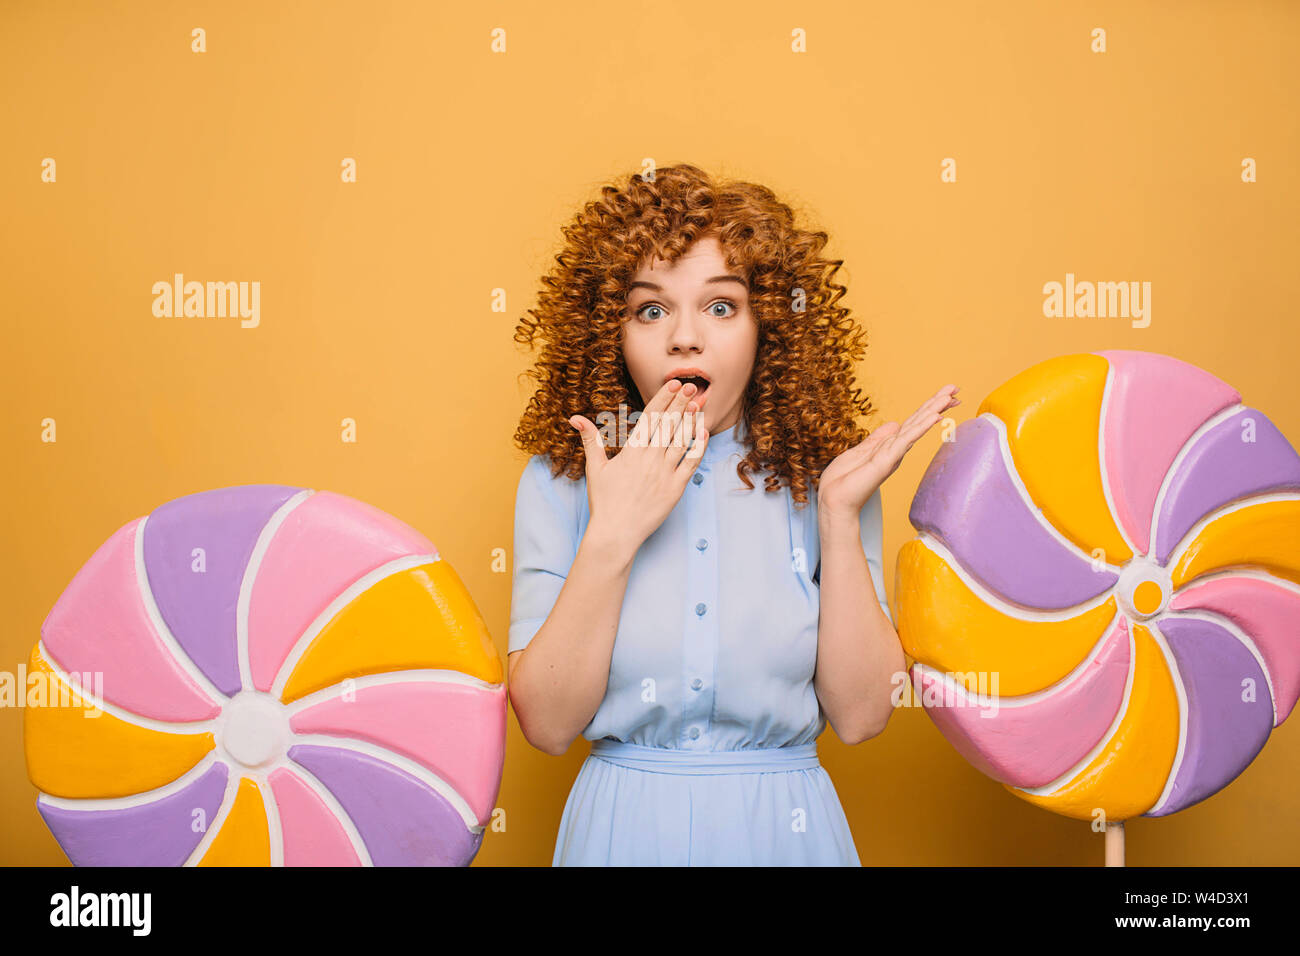 Funny woman with curls and emotionally shocked face standing near big lollipops Stock Photo